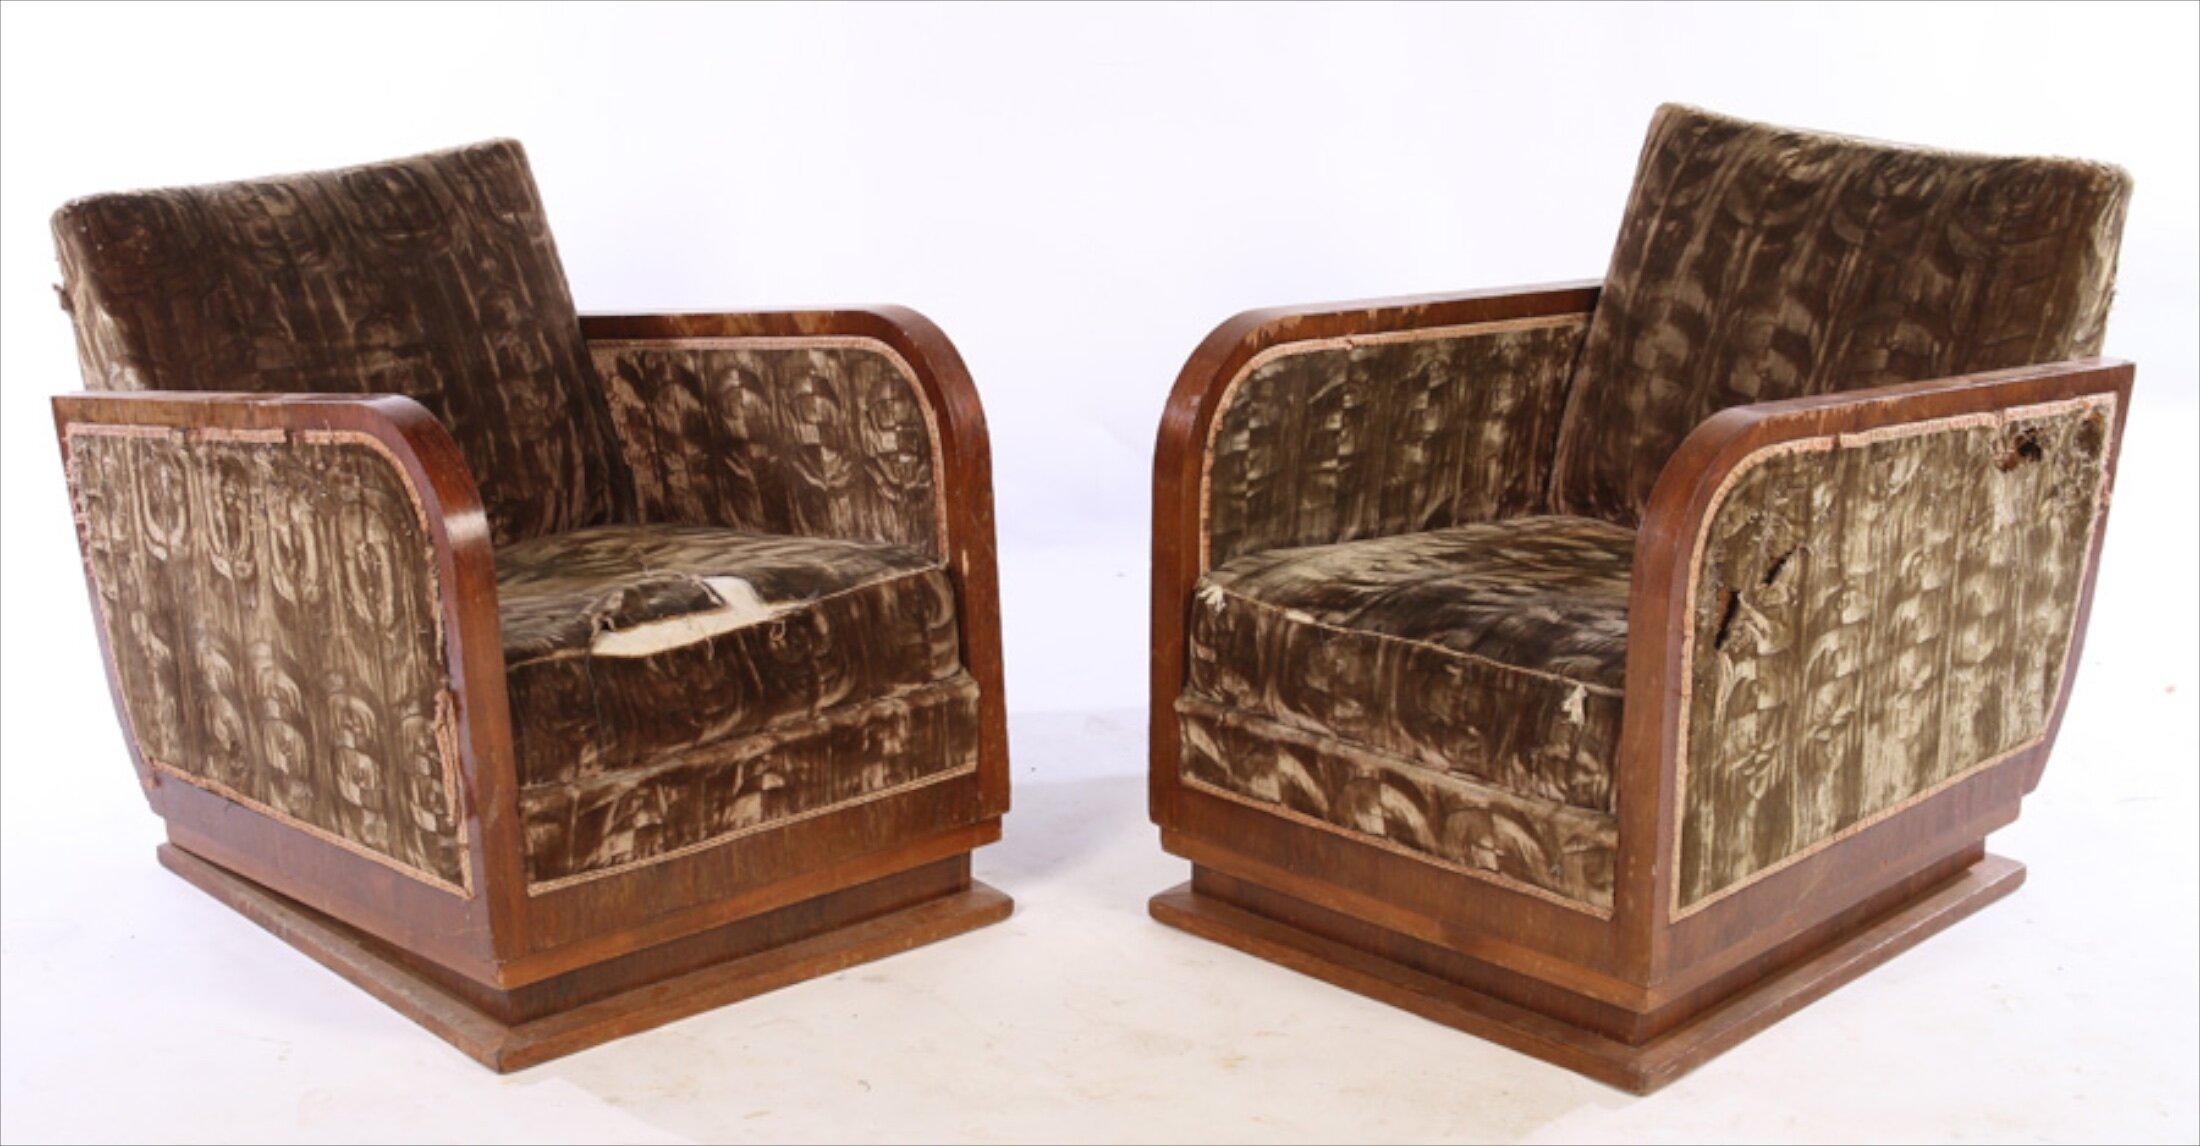 French Modernist Art Deco pair of club chairs by Desny, circa 1930. Measures: 30” wide x 32” deep x 33” high. 

Unrestored in the photographs.

Desny was active 1927-33 on avenue des Champs-Elysees in Paris. The principals of the firm were the